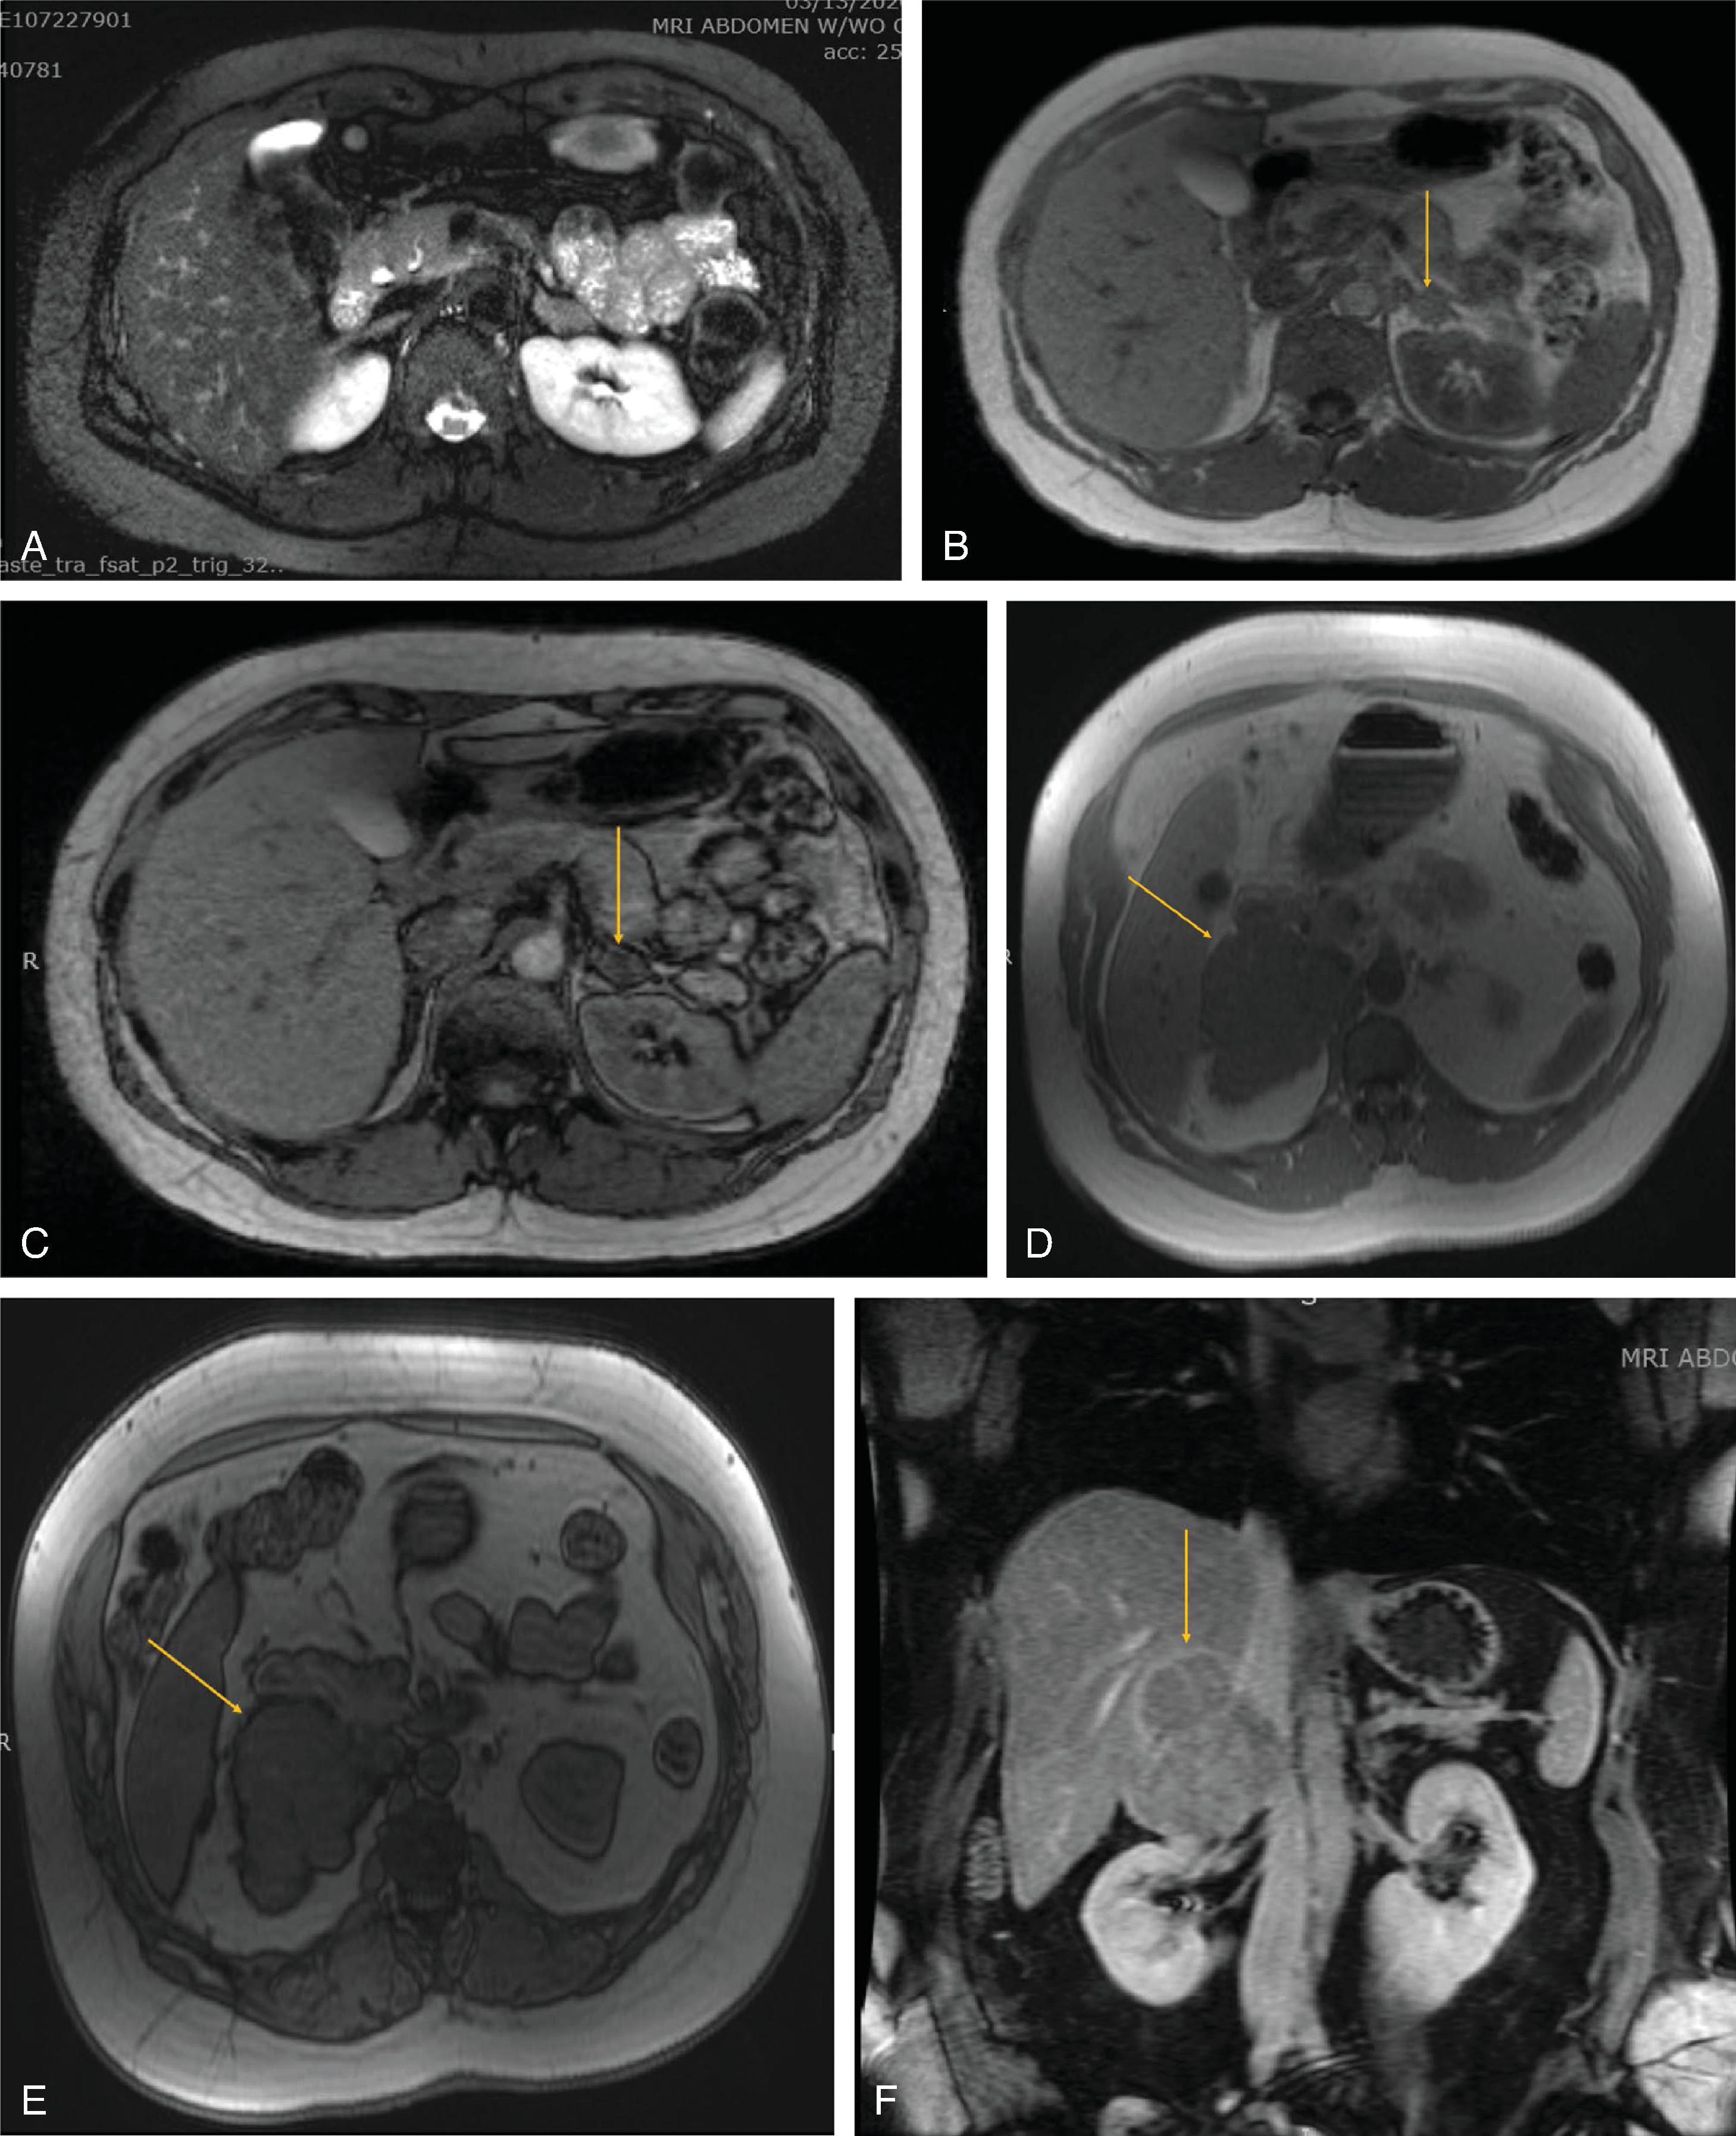 FIG. 2, In a patient with Cushing’s syndrome secondary to a benign cortisol-producing adenoma, T2-weighted image (A) demonstrates an isointense appearance of the nodule. T1-weighted images demonstrate loss of signal intensity shifting from in-phase (B) to out-of-phase (C). (D-F) MR images in a patient with right adrenocortical carcinoma. Compared with in-phase imaging ( D) , out-of-phase imaging (E) demonstrates no evidence of signal dropout to suggest that this lesion contains fat. Postcontrast MRI imaging (F) demonstrates heterogeneous enhancement. There is mass effect on the adjacent inferior vena cava without discrete infiltration of the inferior vena cava.